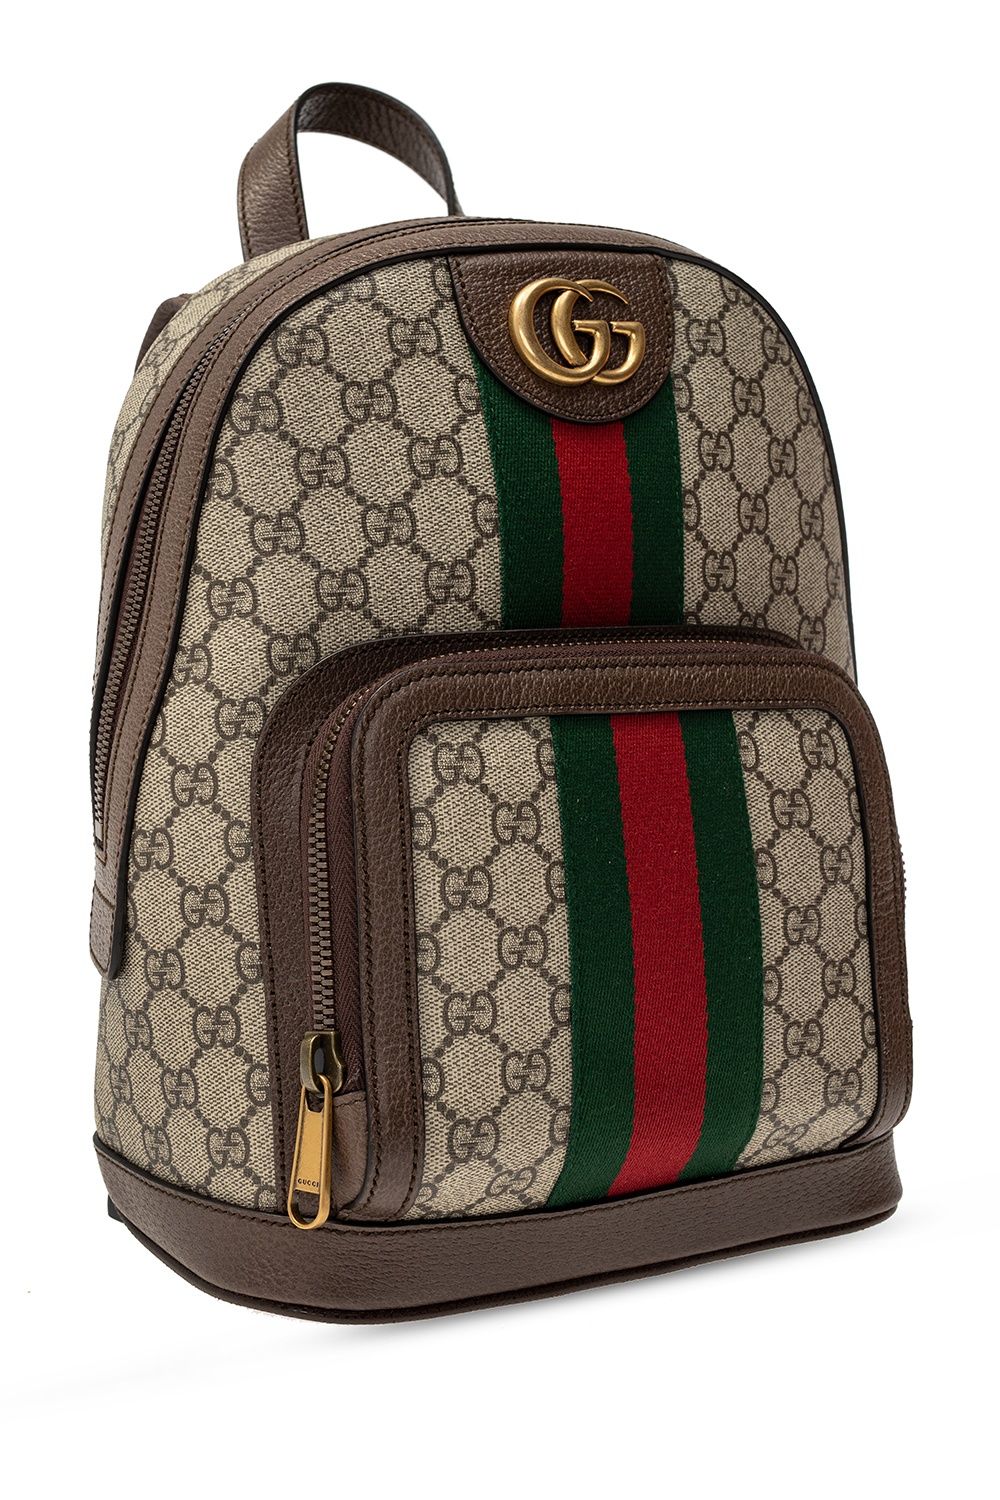 BALO UNISEX GUCCI OPHIDIA GG SMALL BACKPACK 22